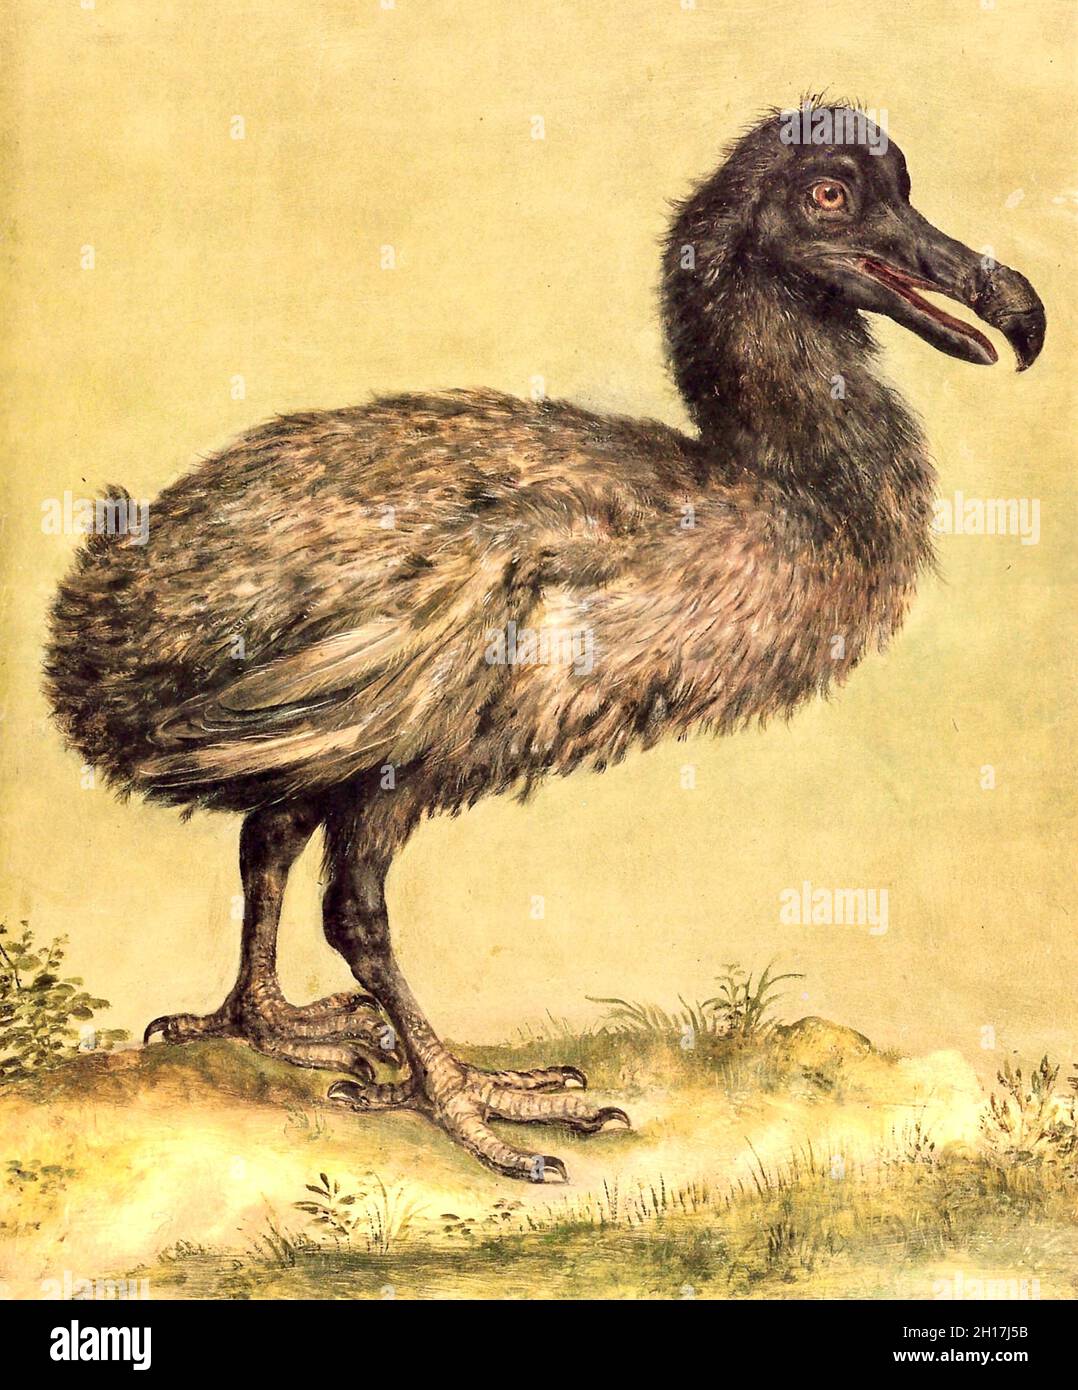 Dodo - Jacob Hoefnagel - Illustration of a dodo in the menagerie of Emperor Rudolph II at Prague - 1602 Stock Photo